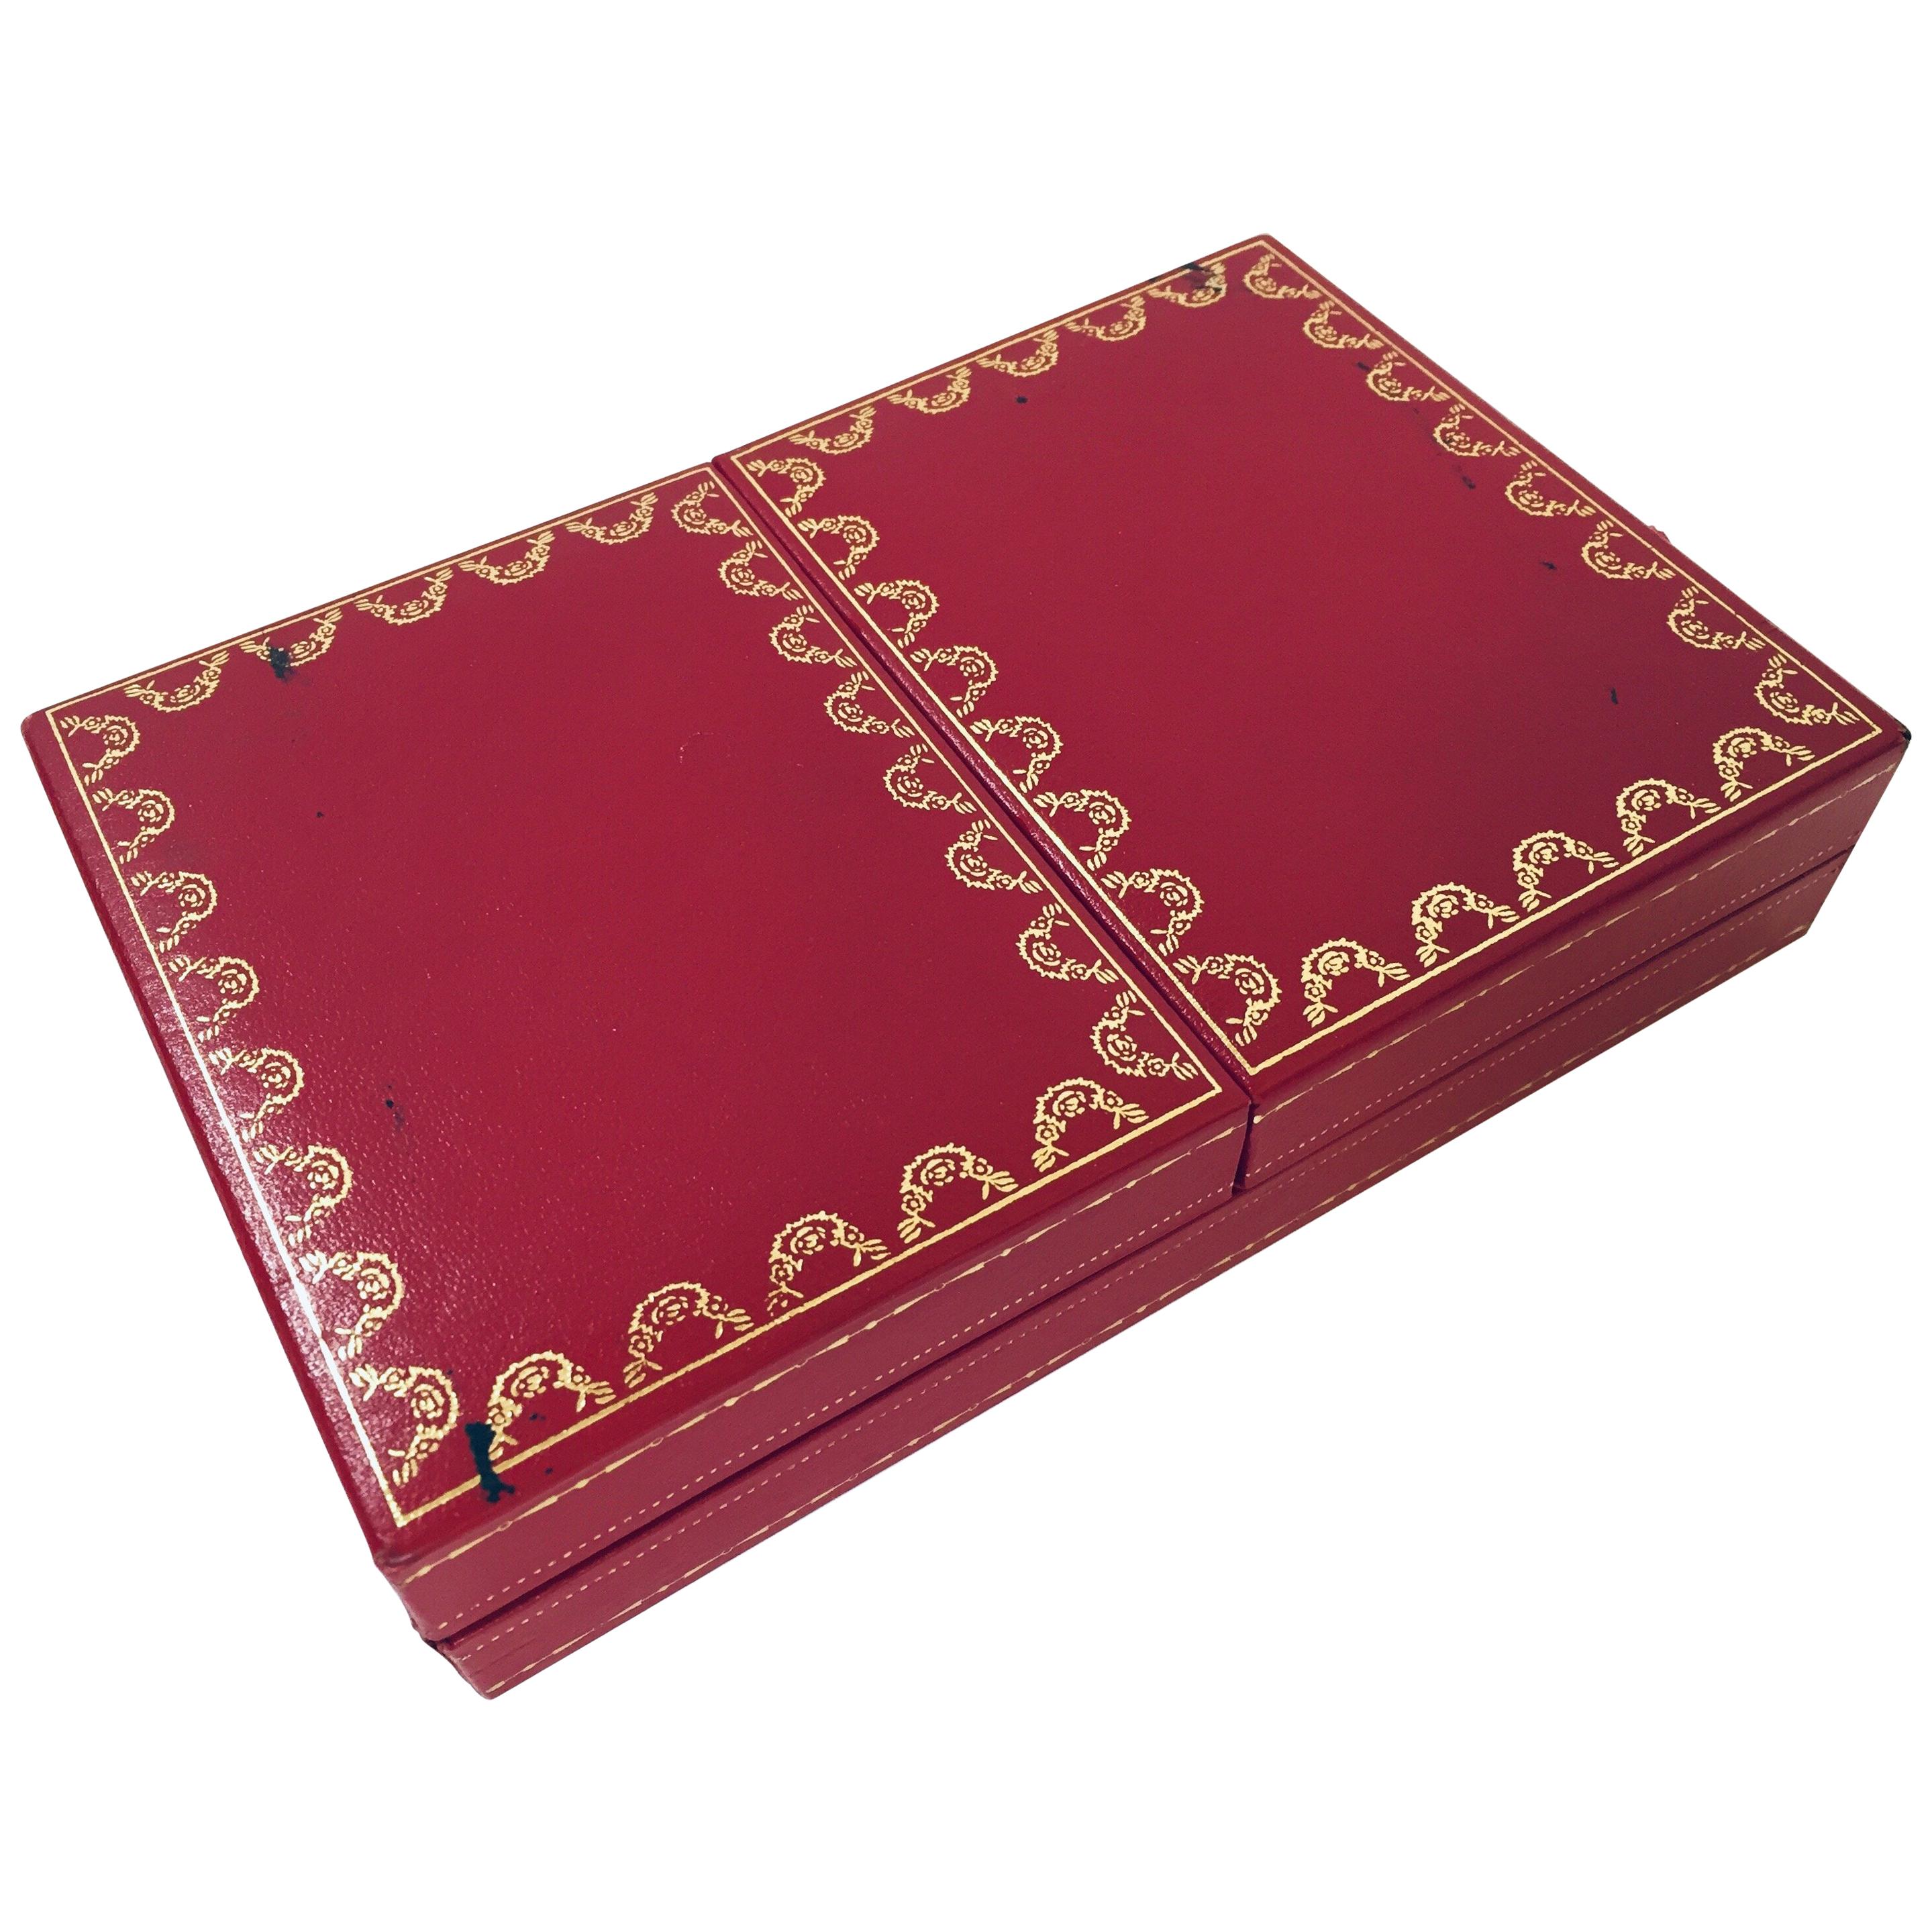 Cartier playing cards, one deck plus joker, poker, bridge playing cards in Cartier red 2-doors case.
Les Must de Cartier playing cards were only sold from 1972-1976. 
This silk-lined box of cards with 18k gilted corners, printed with the Les Must de